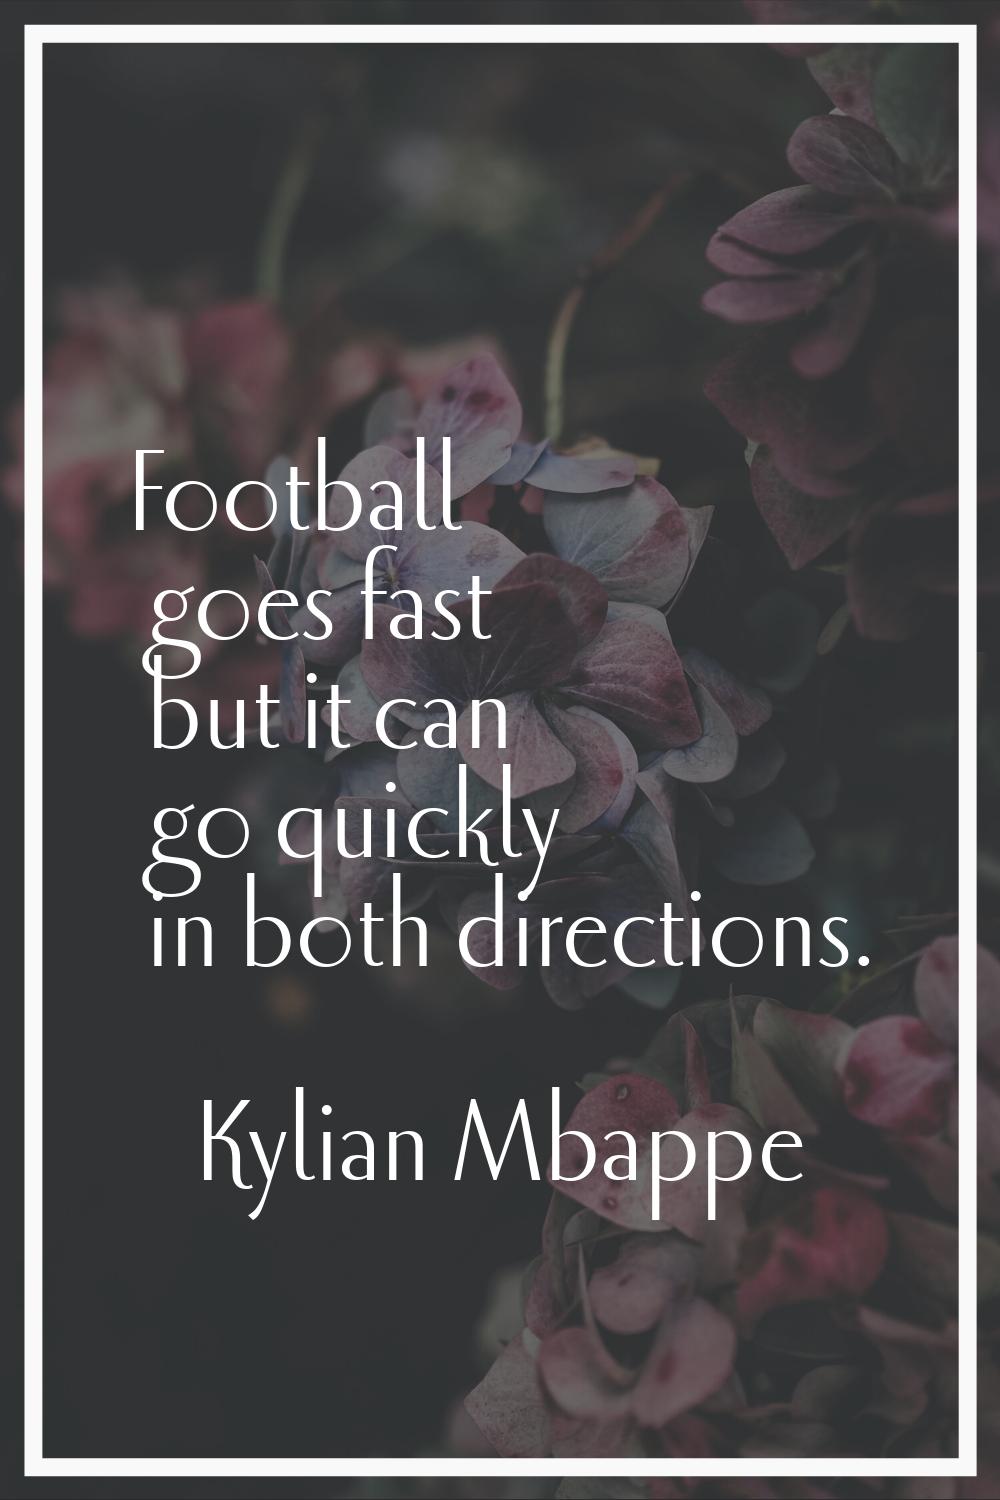 Football goes fast but it can go quickly in both directions.